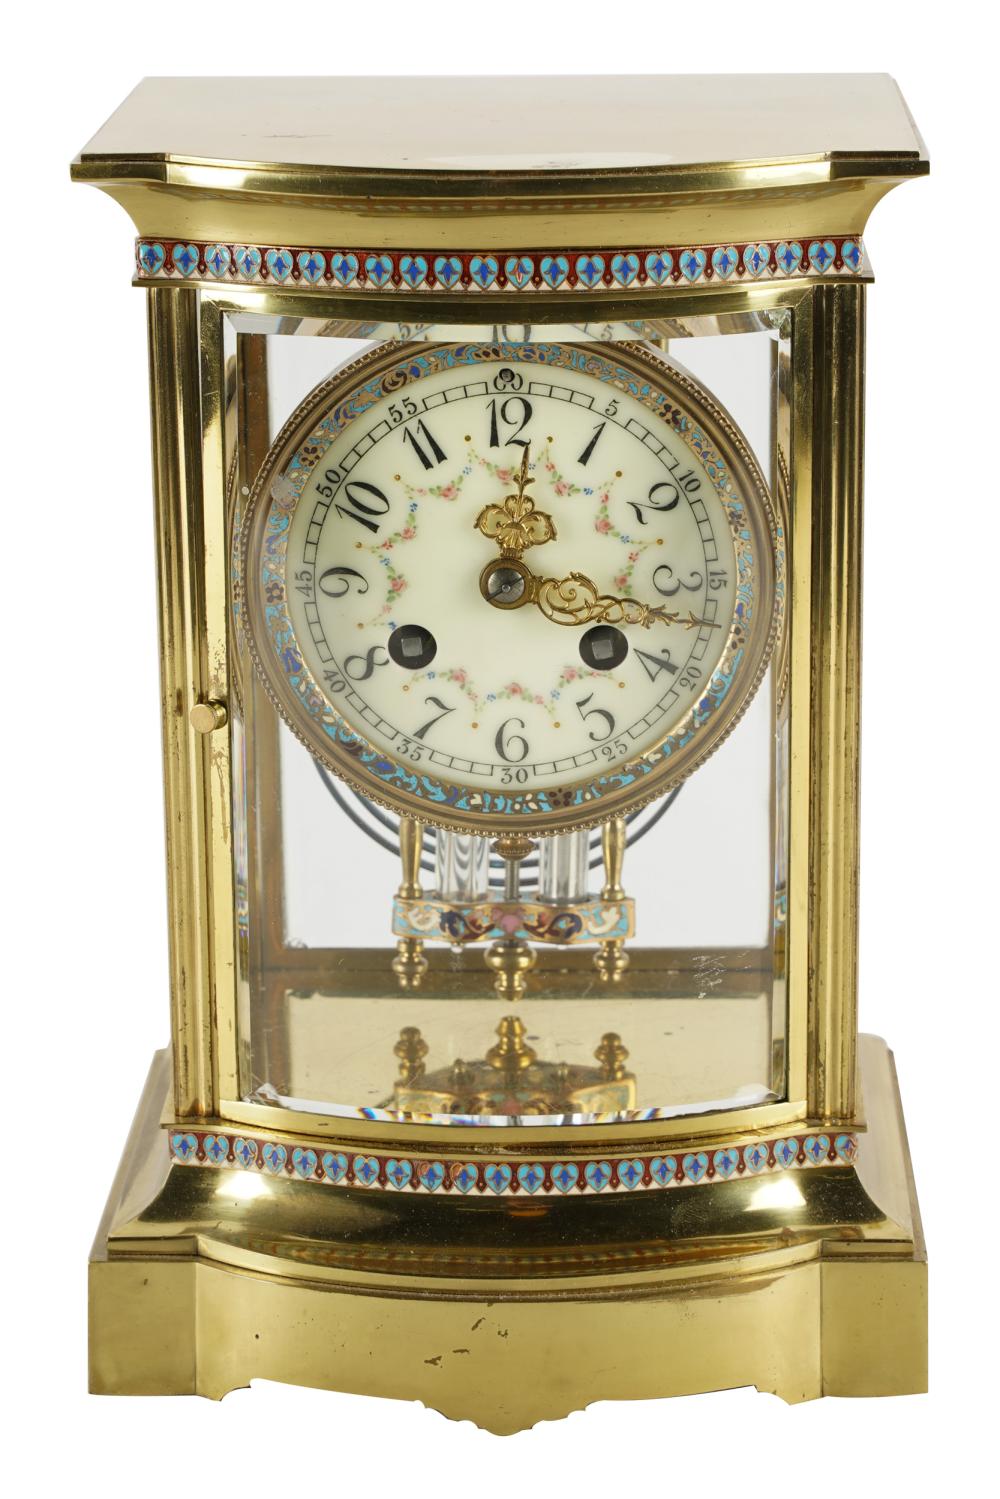 BRASS CHAMPELEVE MANTLE CLOCKwith 3335cc